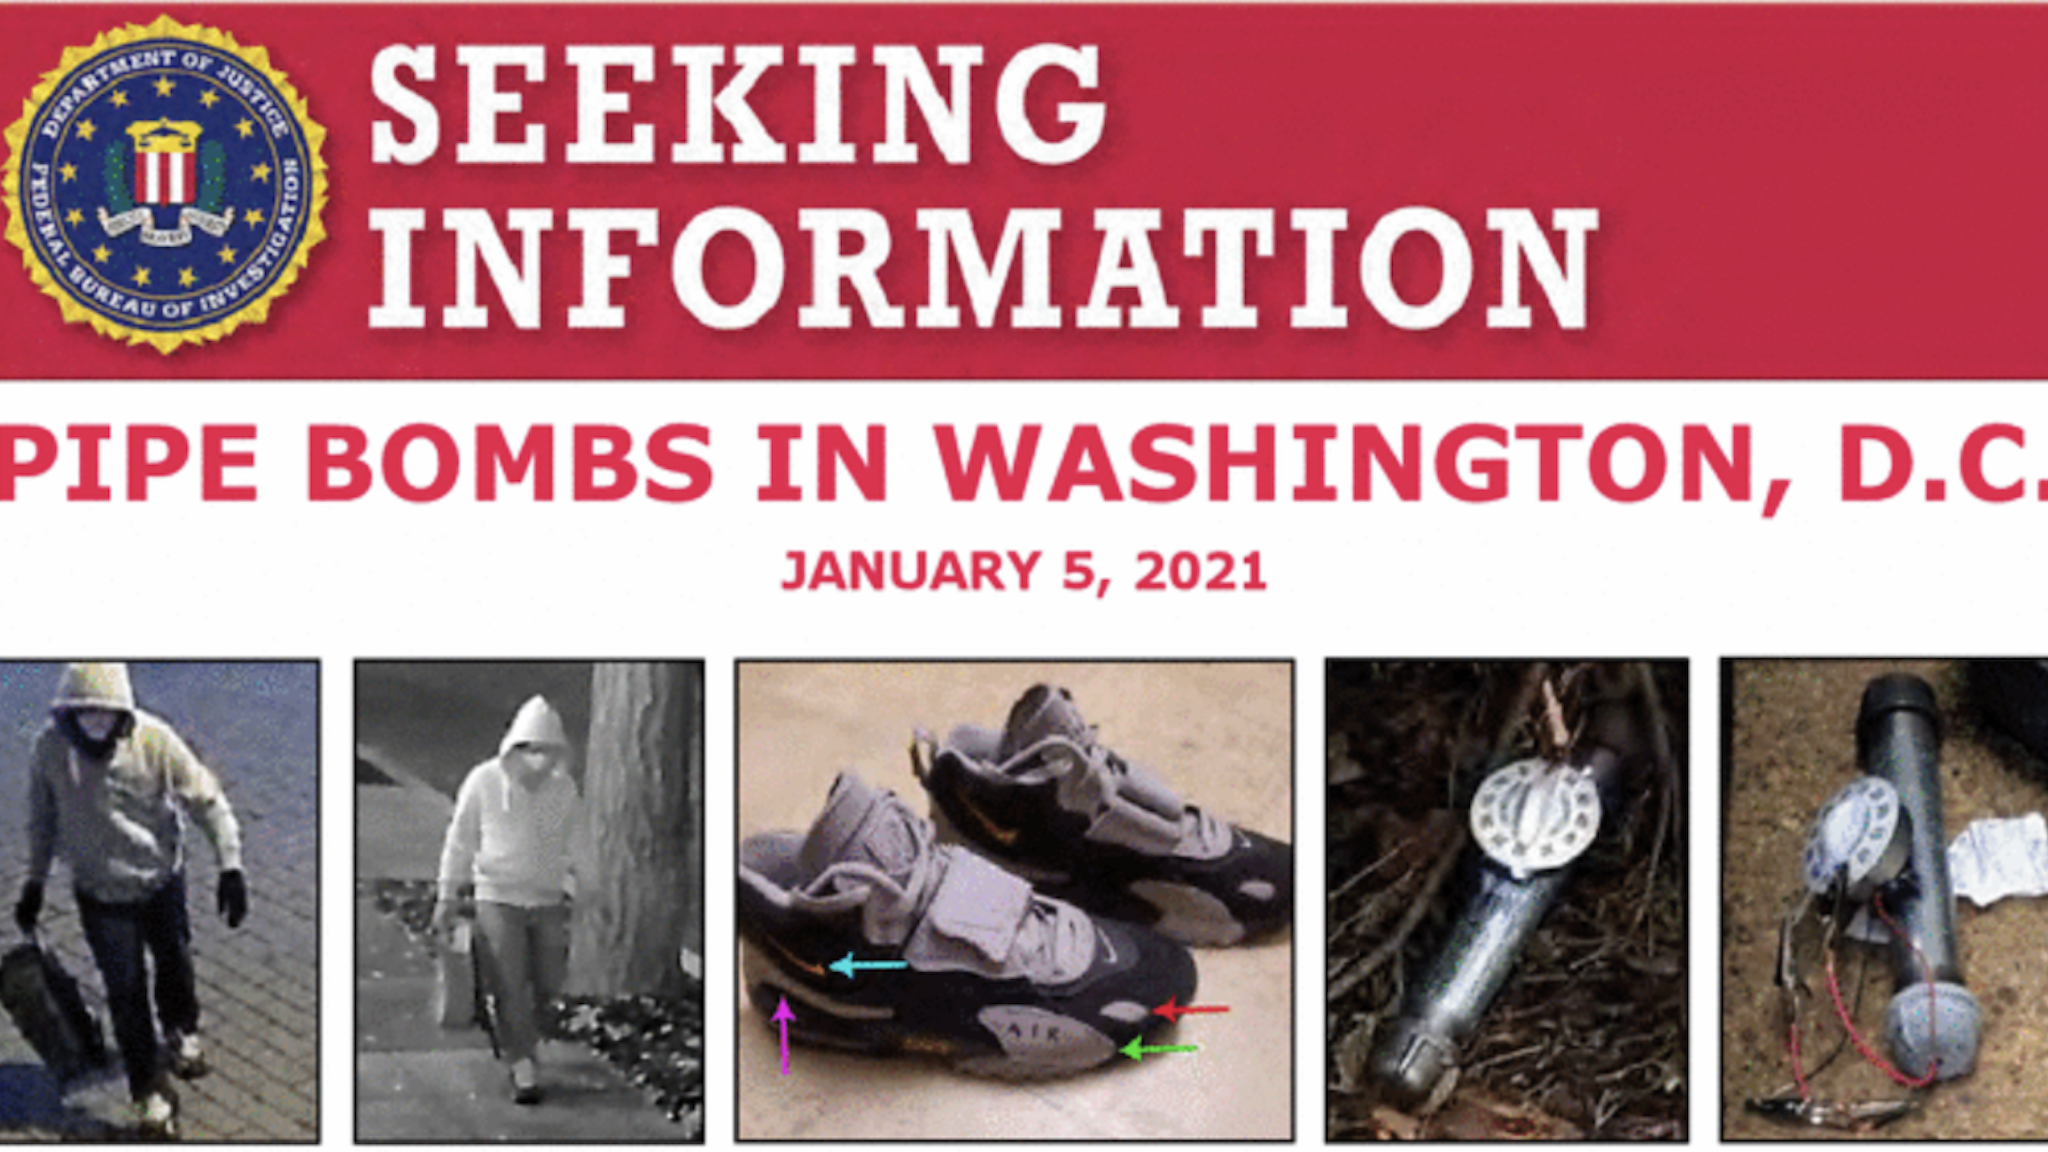 Photos released by the FBI of the person who they say planted bombs on January 5, 2021 / FBI